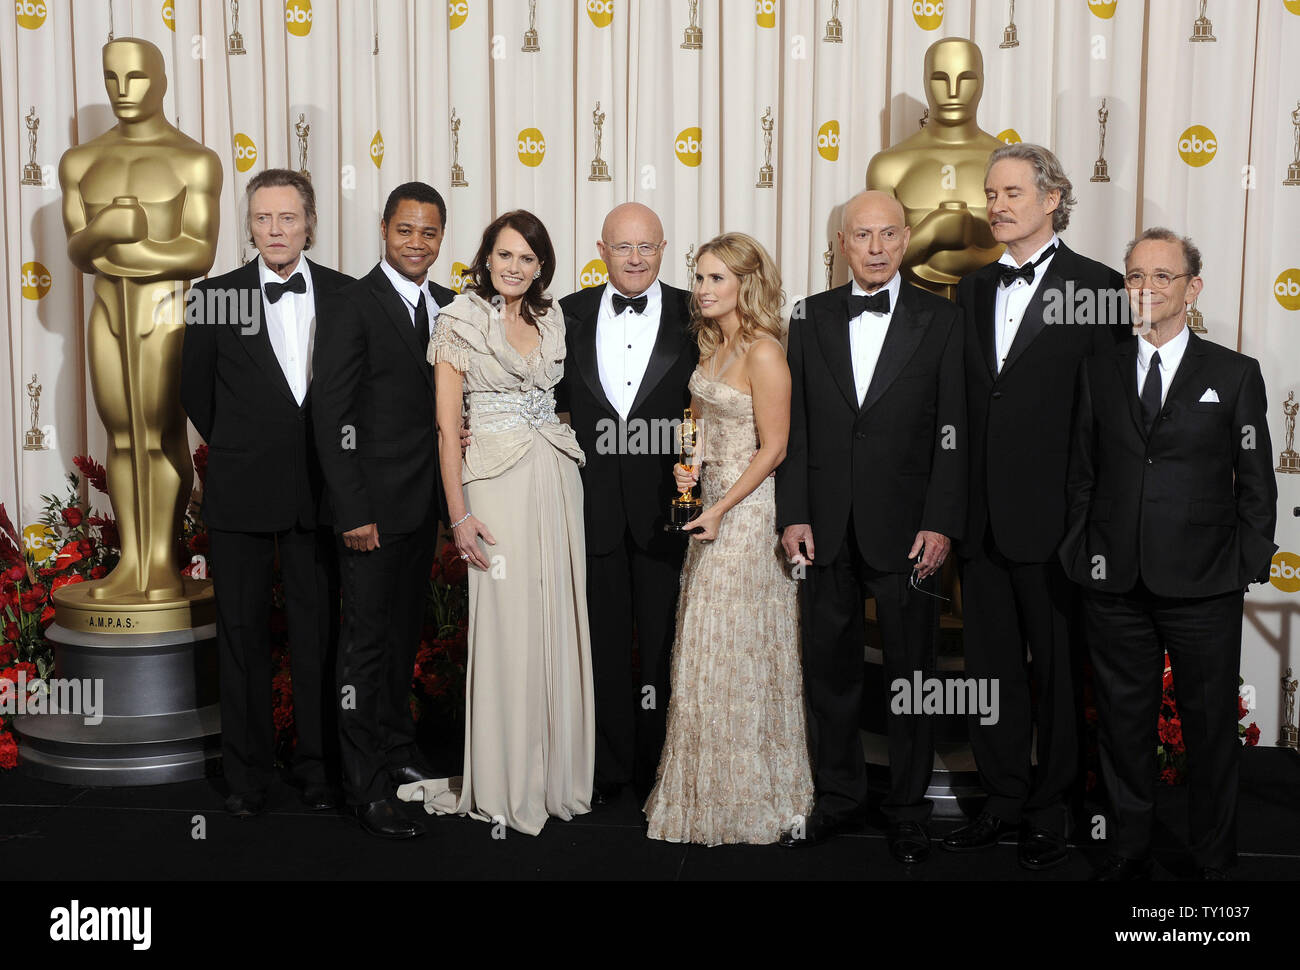 The family of actor Heath Ledger, mother Sally Bell (3rd L), father Kim Ledger(4th L) and sister Kate Ledger (4th R), hold his Oscar for best supporting actor in the film 'The Dark Knight' with presenters and former best supporting actor winners Christopher Walken,  (L), Cuba Gooding Jr. (2nd L), Alan Arkin (3rd R), Kevin Kline (2nd R) and Joel Gray at the 81st Academy Awards in Hollywood on February 22, 2009.   (UPI Photo/Phil McCarten) Stock Photo